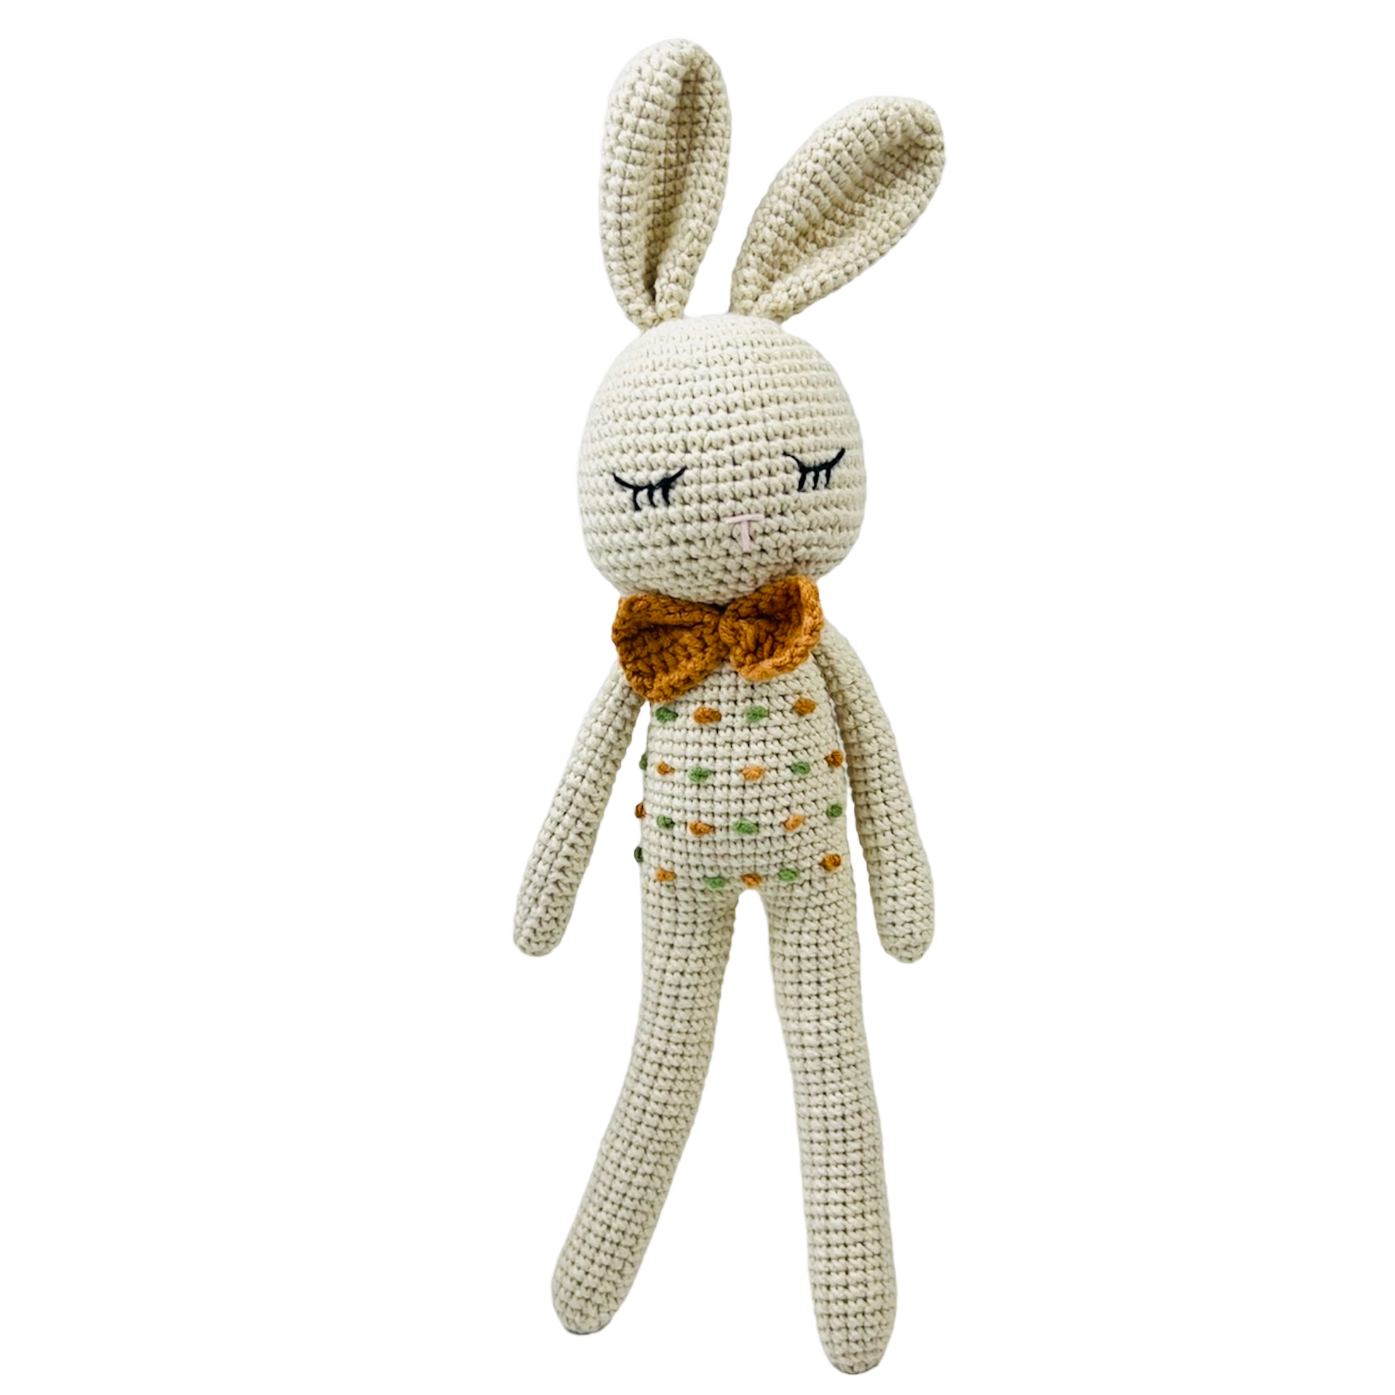 Crocheted Animal Doll - Oliver, the Bunny